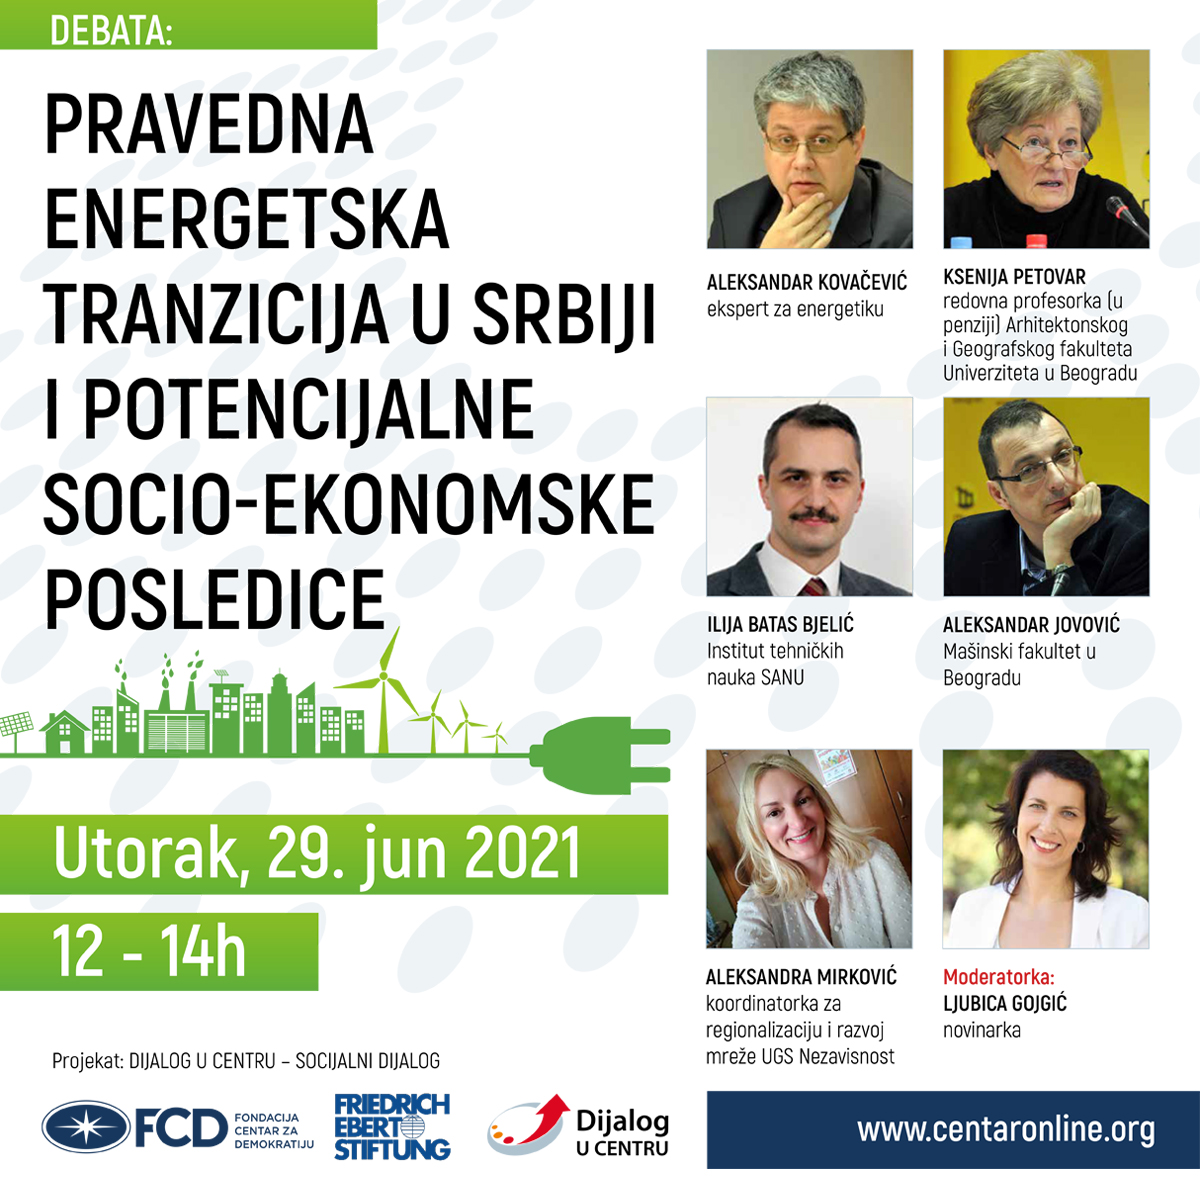 Fair Energy Transition in Serbia and Potential Social and Economic Consequences debate